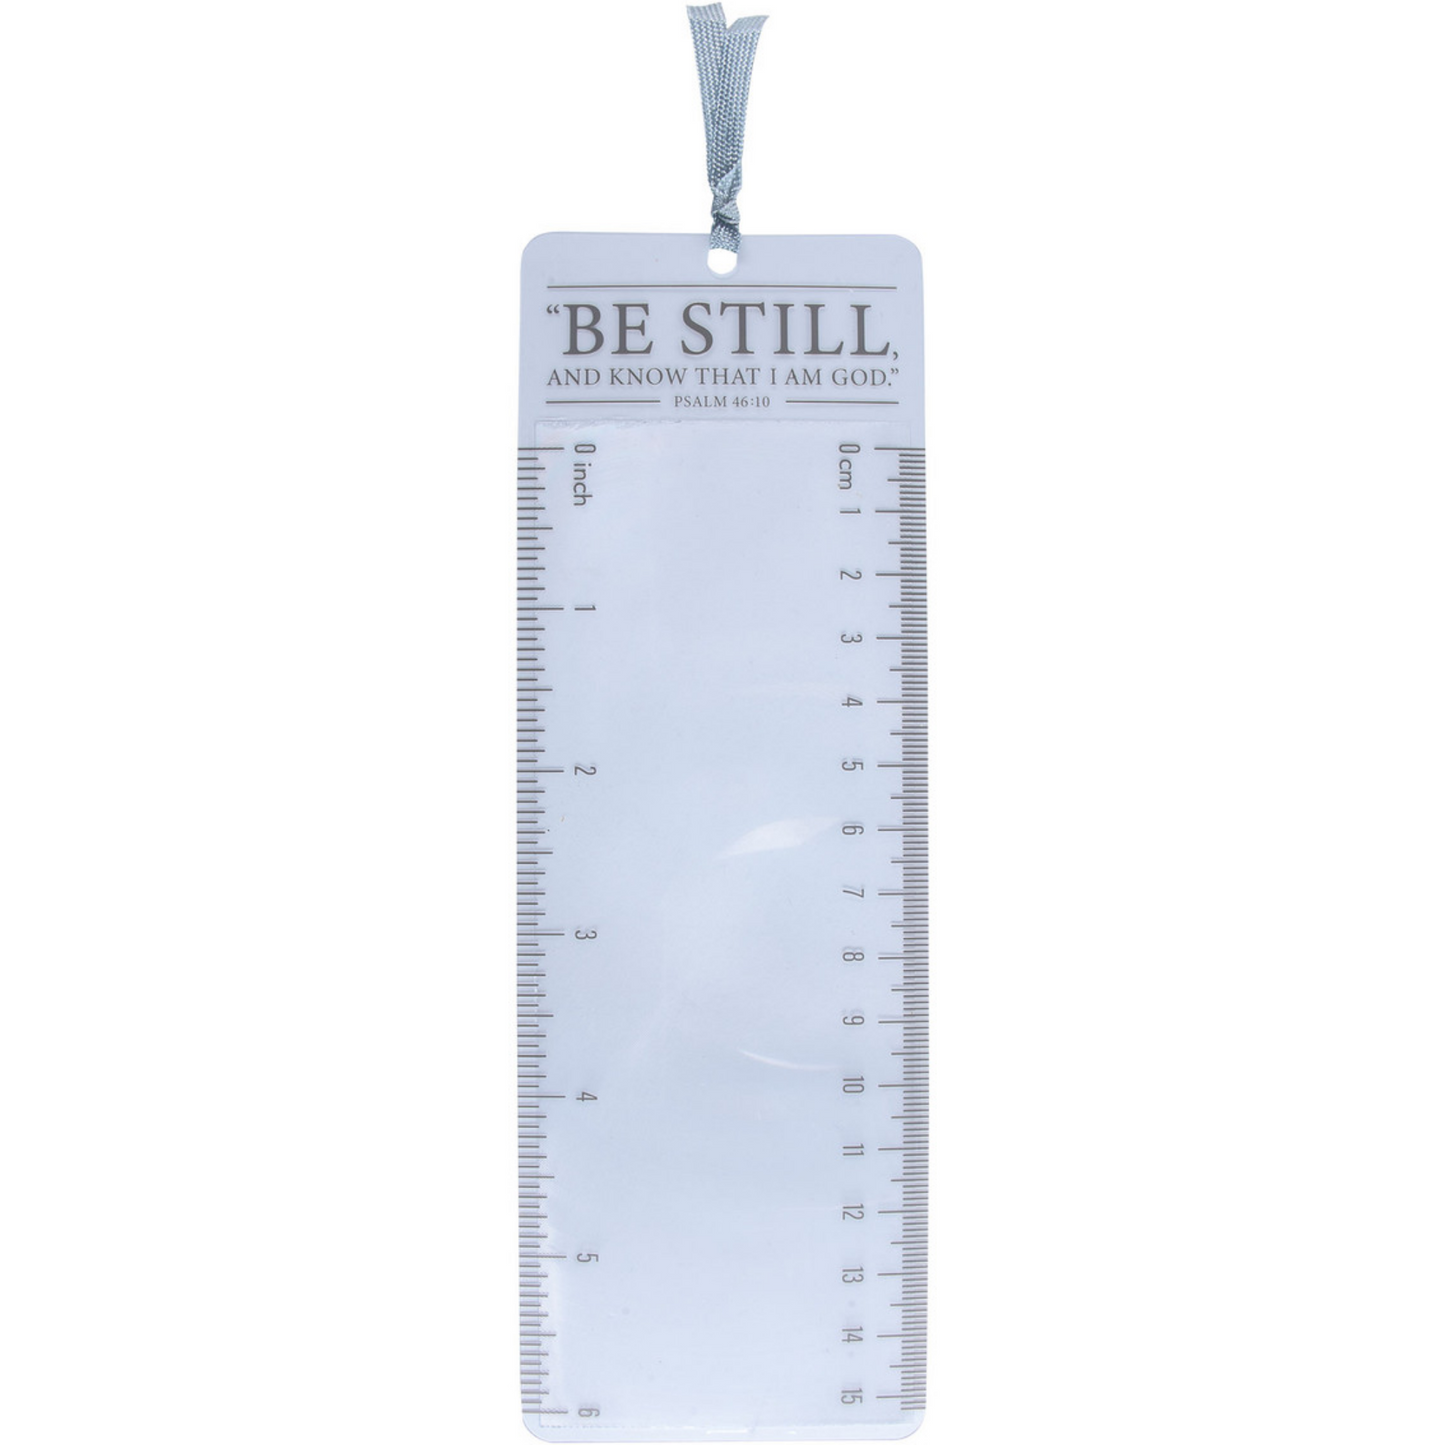 Be Still Magnifying Bookmark - Psalm 46:10 (MST170)